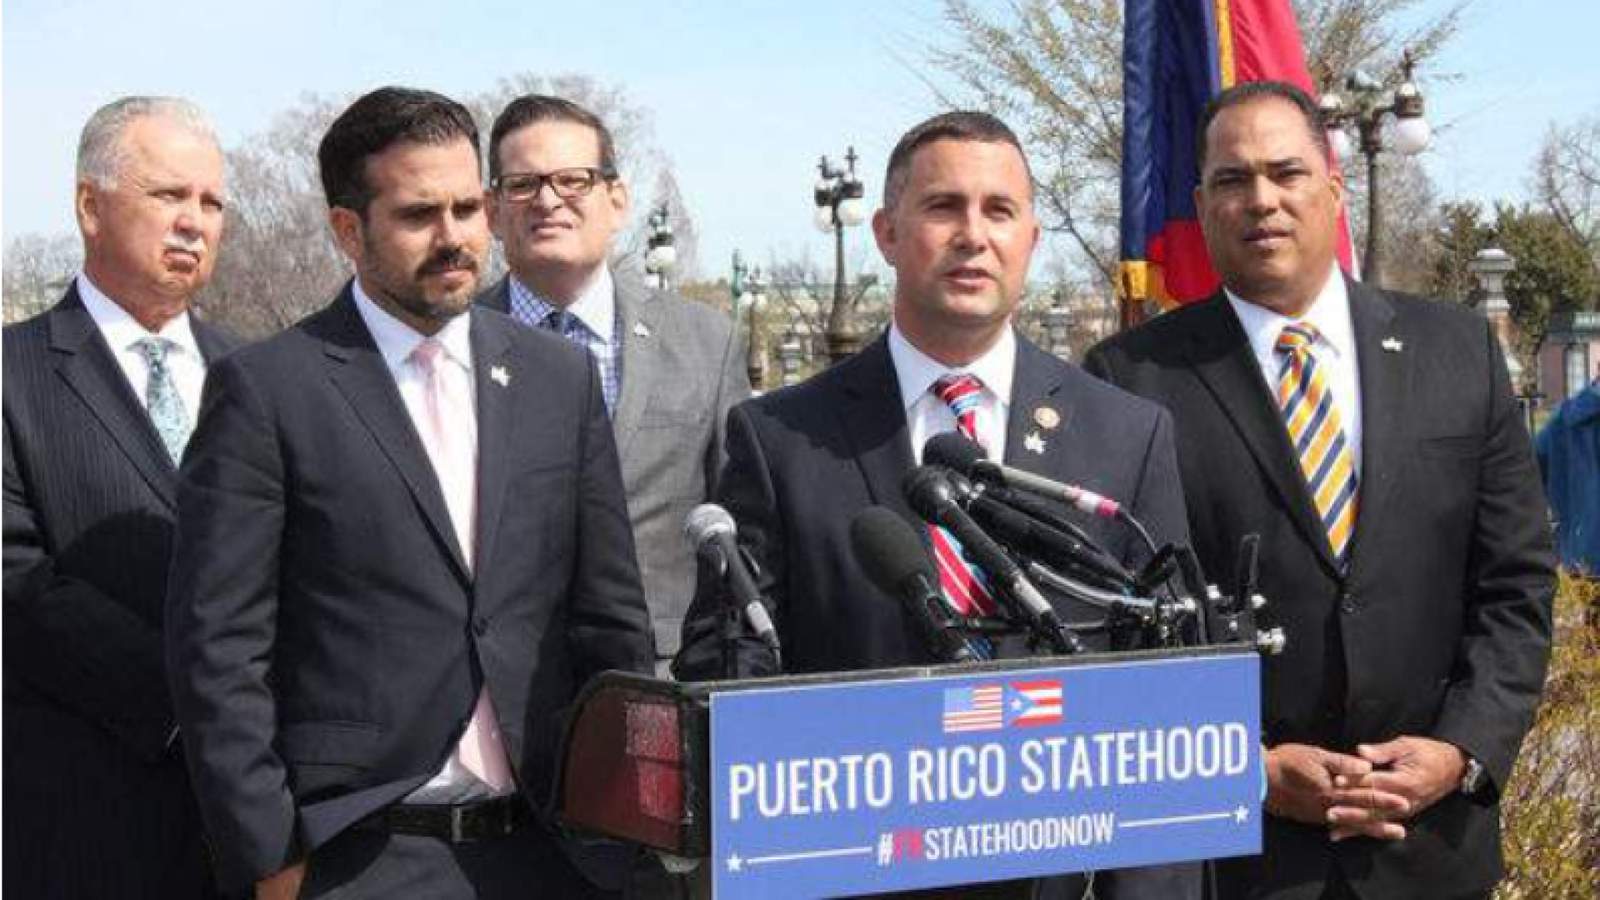 Congressman Soto discusses COVID relief package, Puerto Rico statehood on ‘The Weekly’